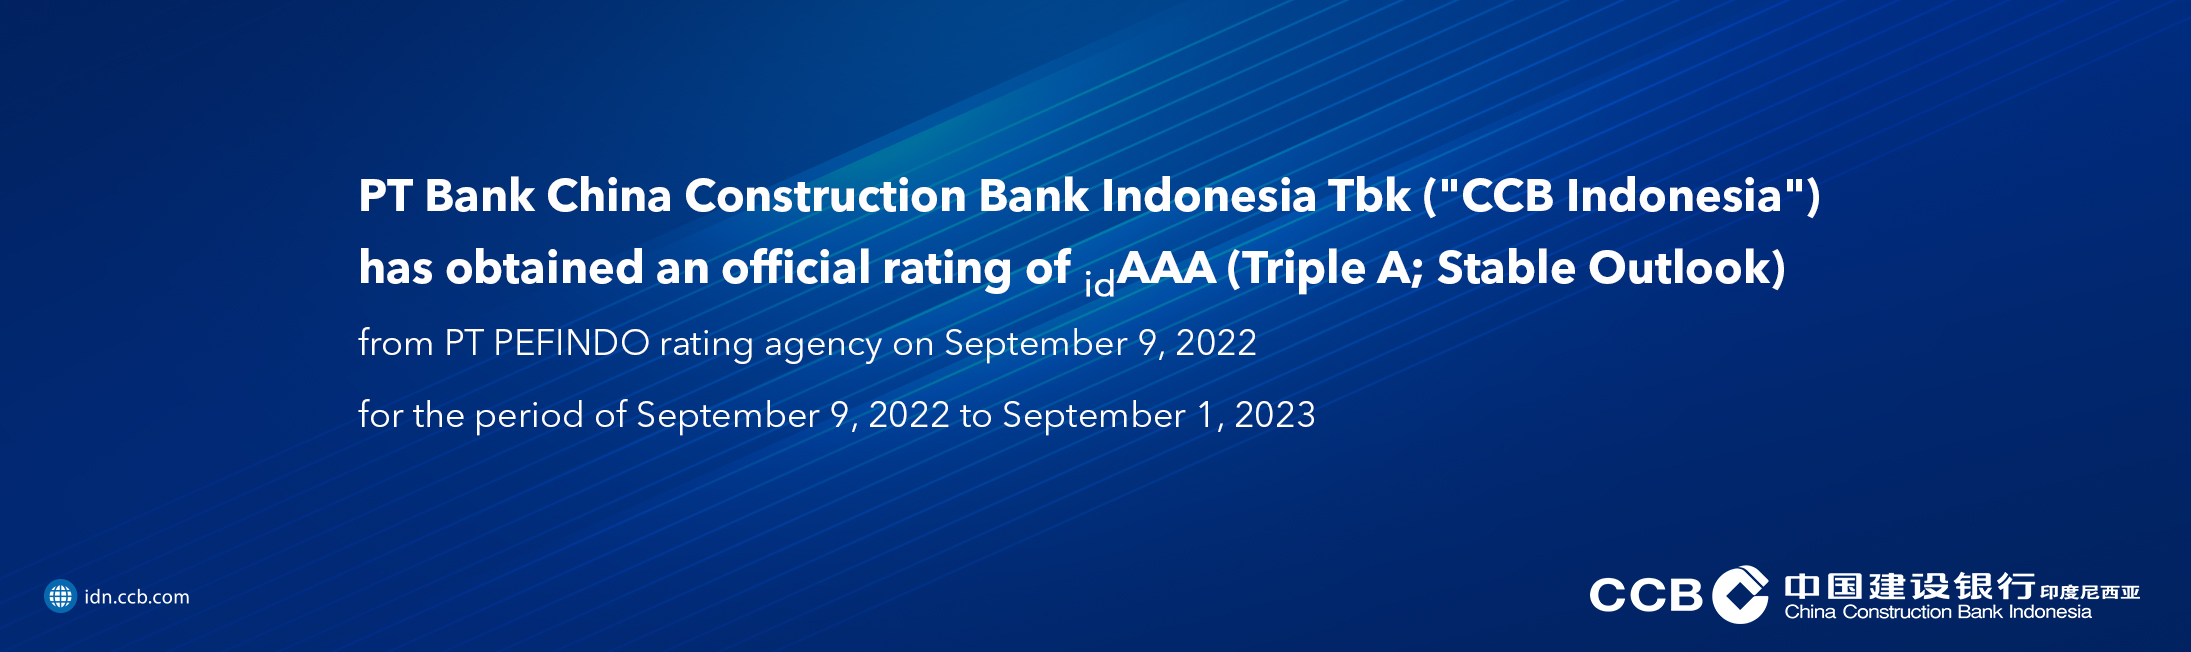 CCB Indonesia has obtained an official rating of idAAA

